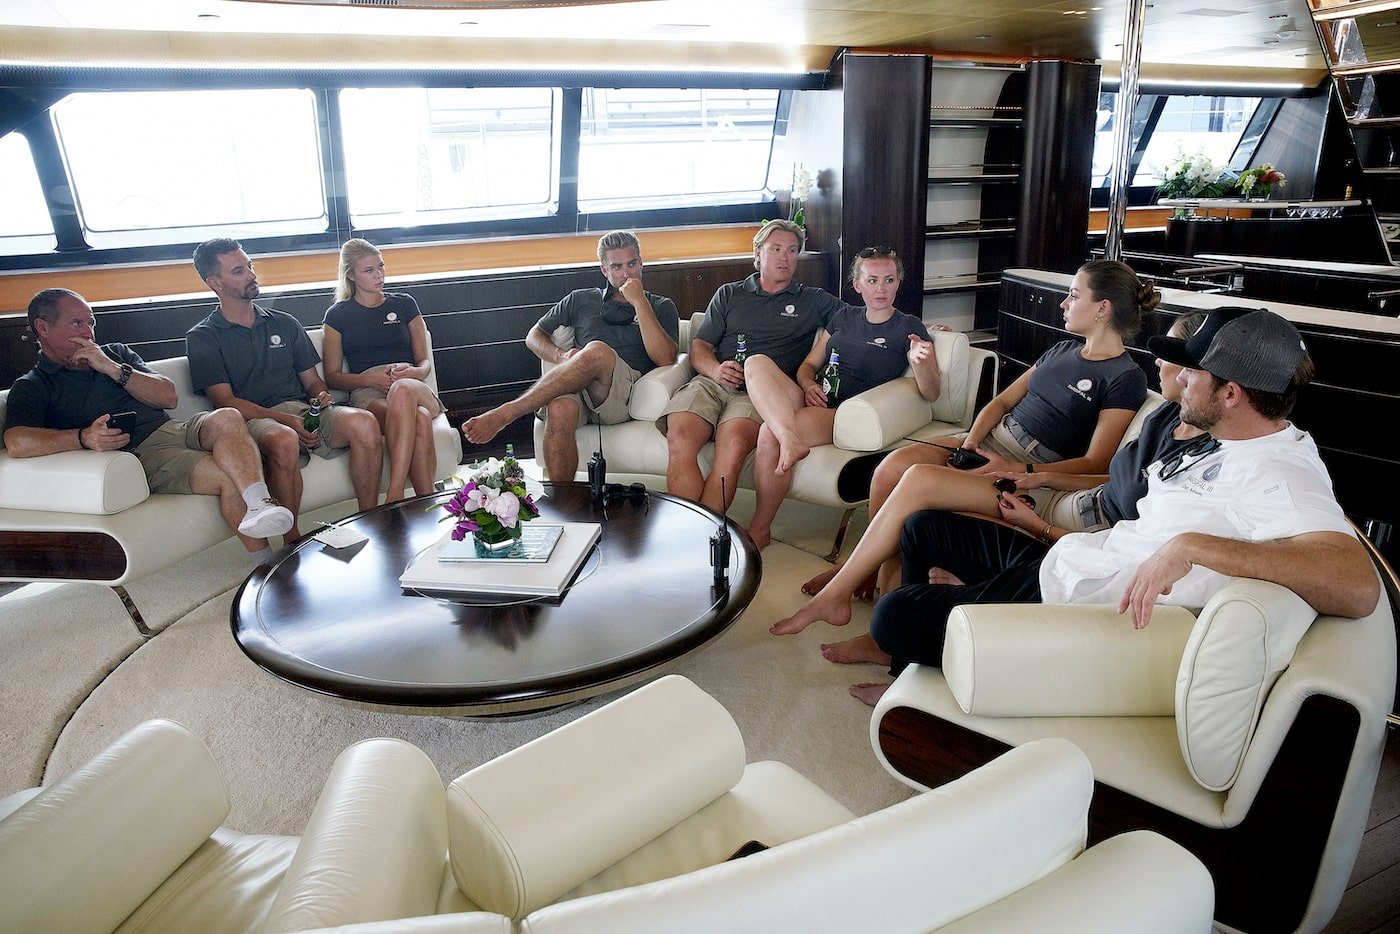 The 'Below Deck Sailing Yacht' crew sit on the white couch